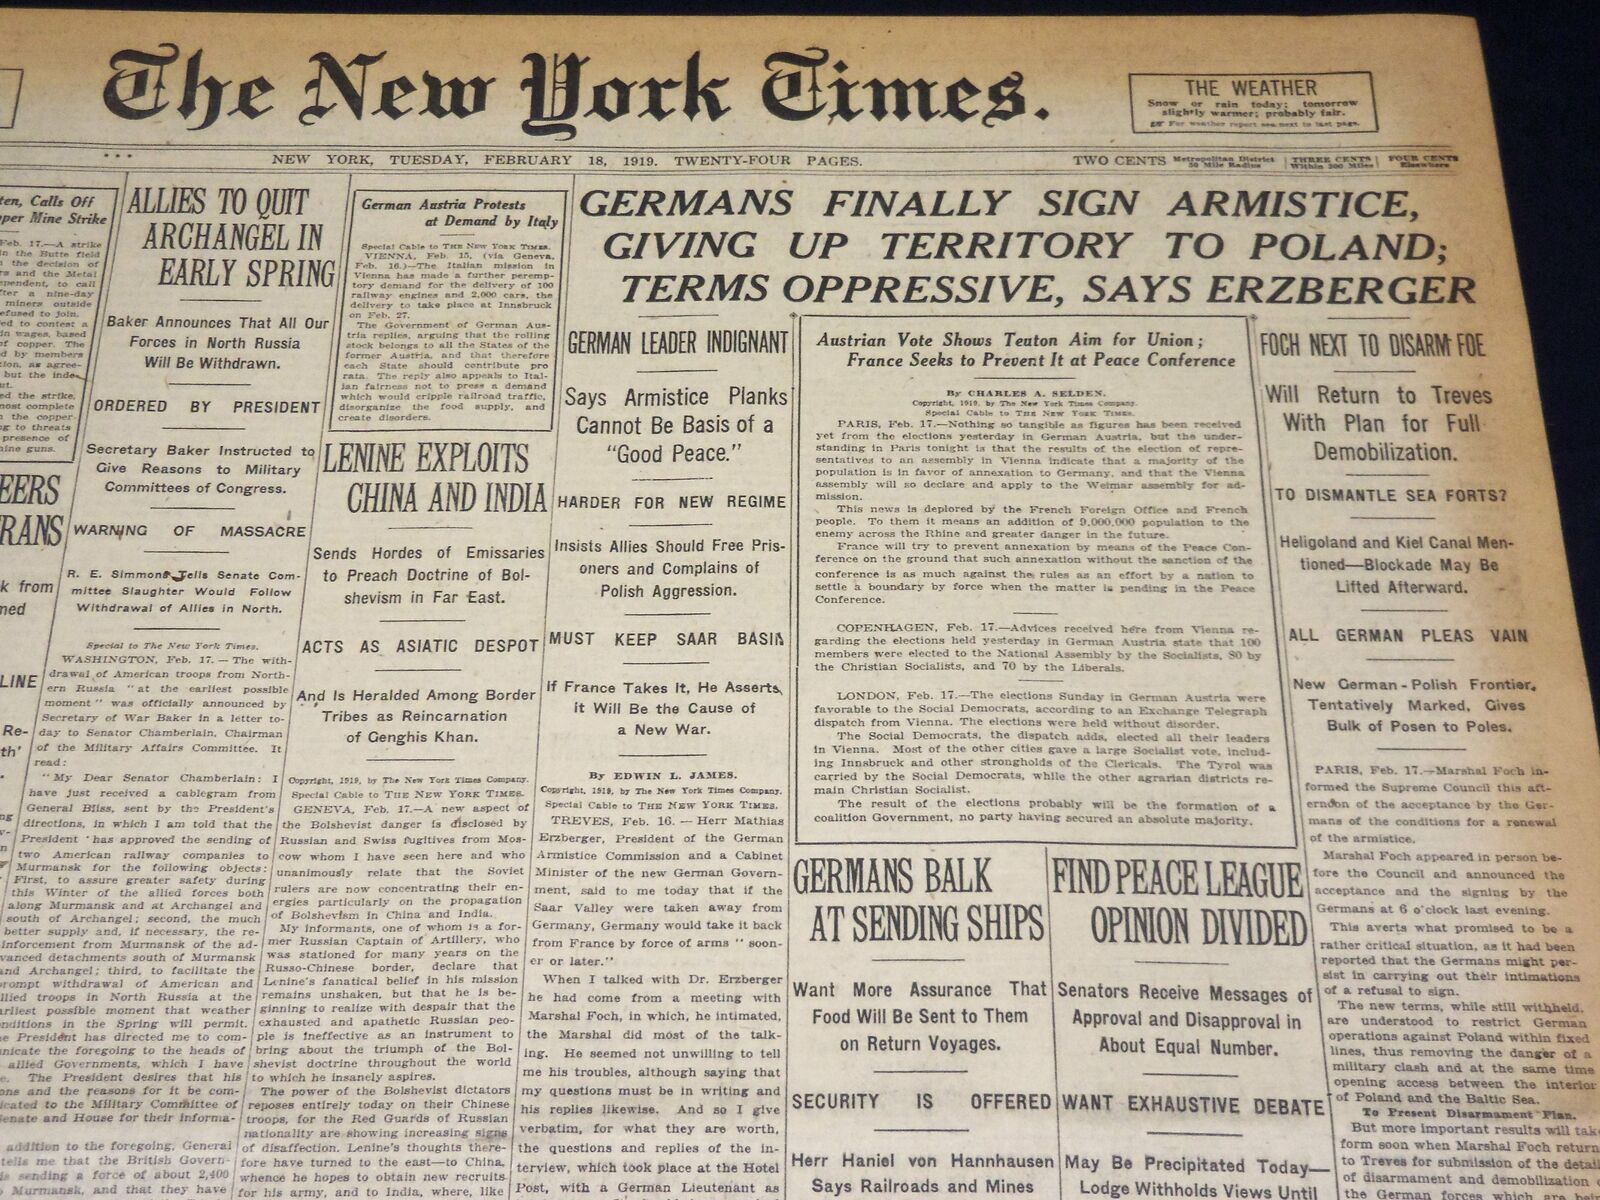 1919 FEBRUARY 18 NEW YORK TIMES - GERMANY FINALLY SIGNS ARMISTICE - NT 7977